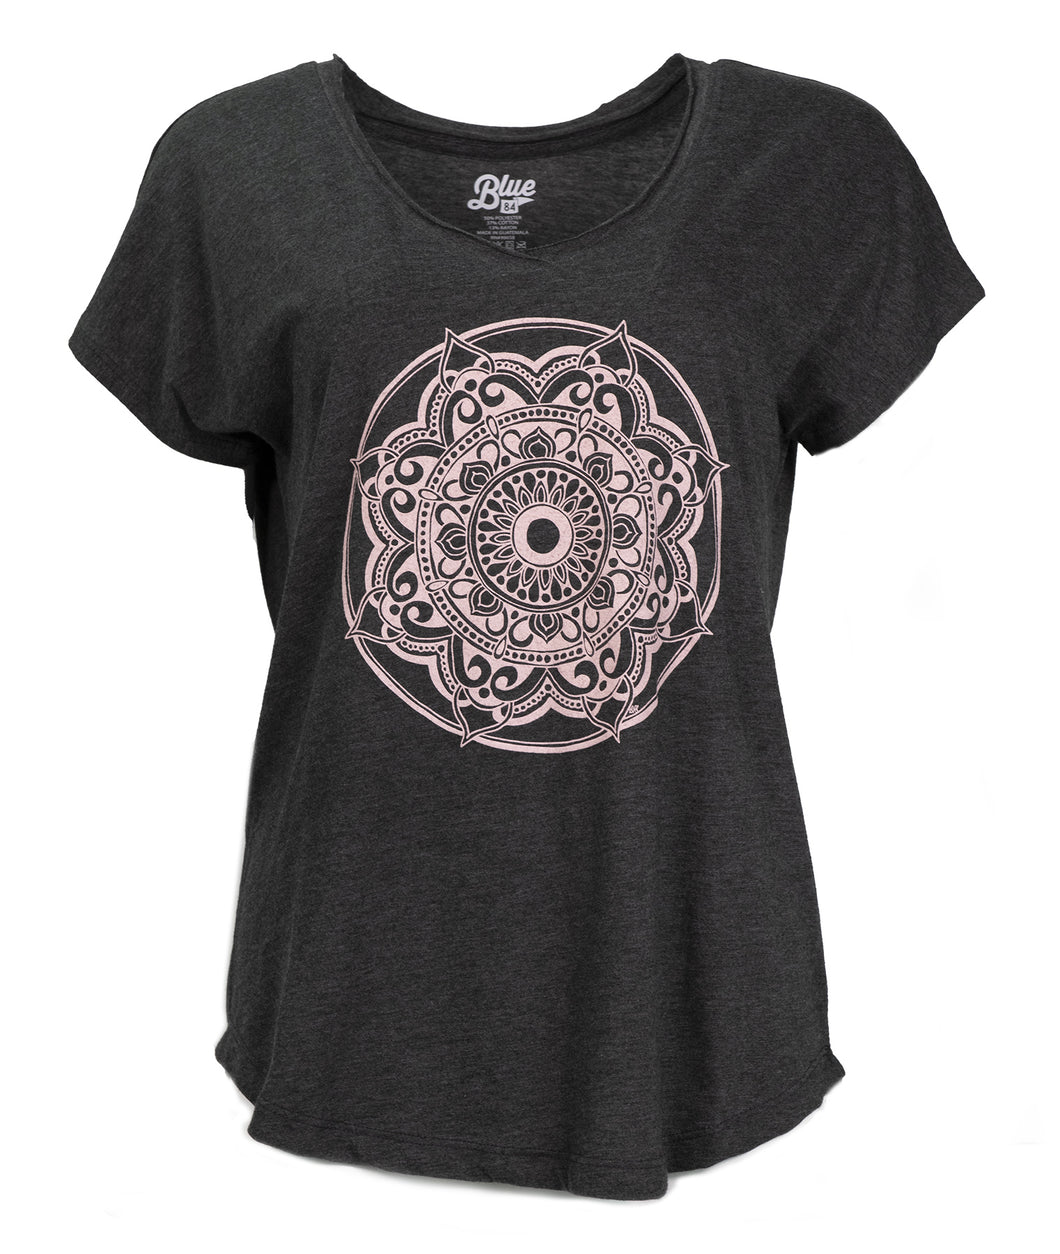 Product Image : Front View - Black Women's Tri-blend V-neck Tee with a large light pink mandala design centered